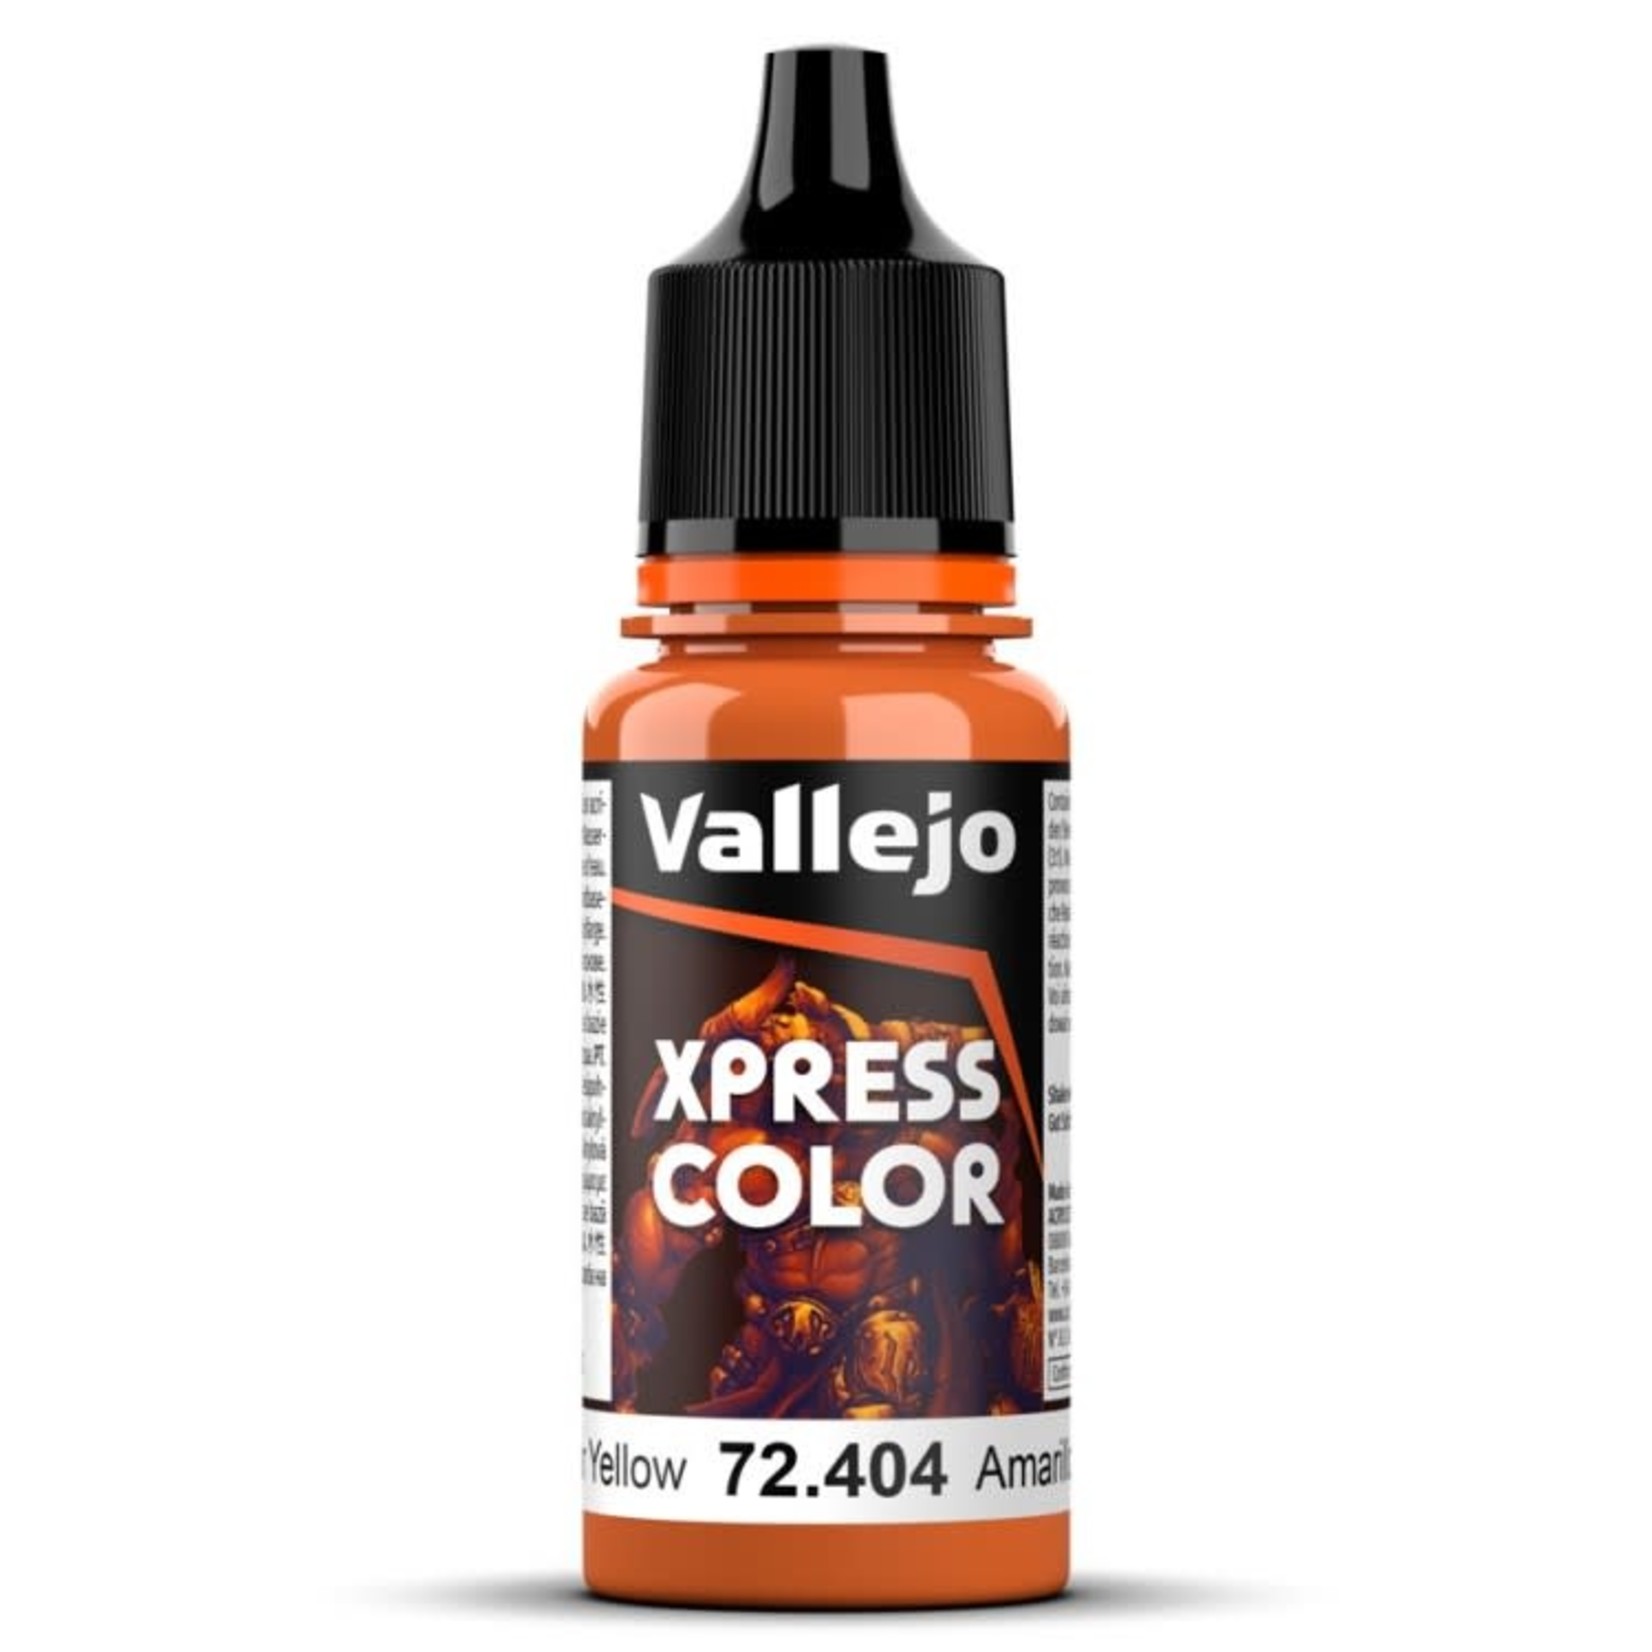 Vallejo Paint: Xpress (Nuclear Yellow)